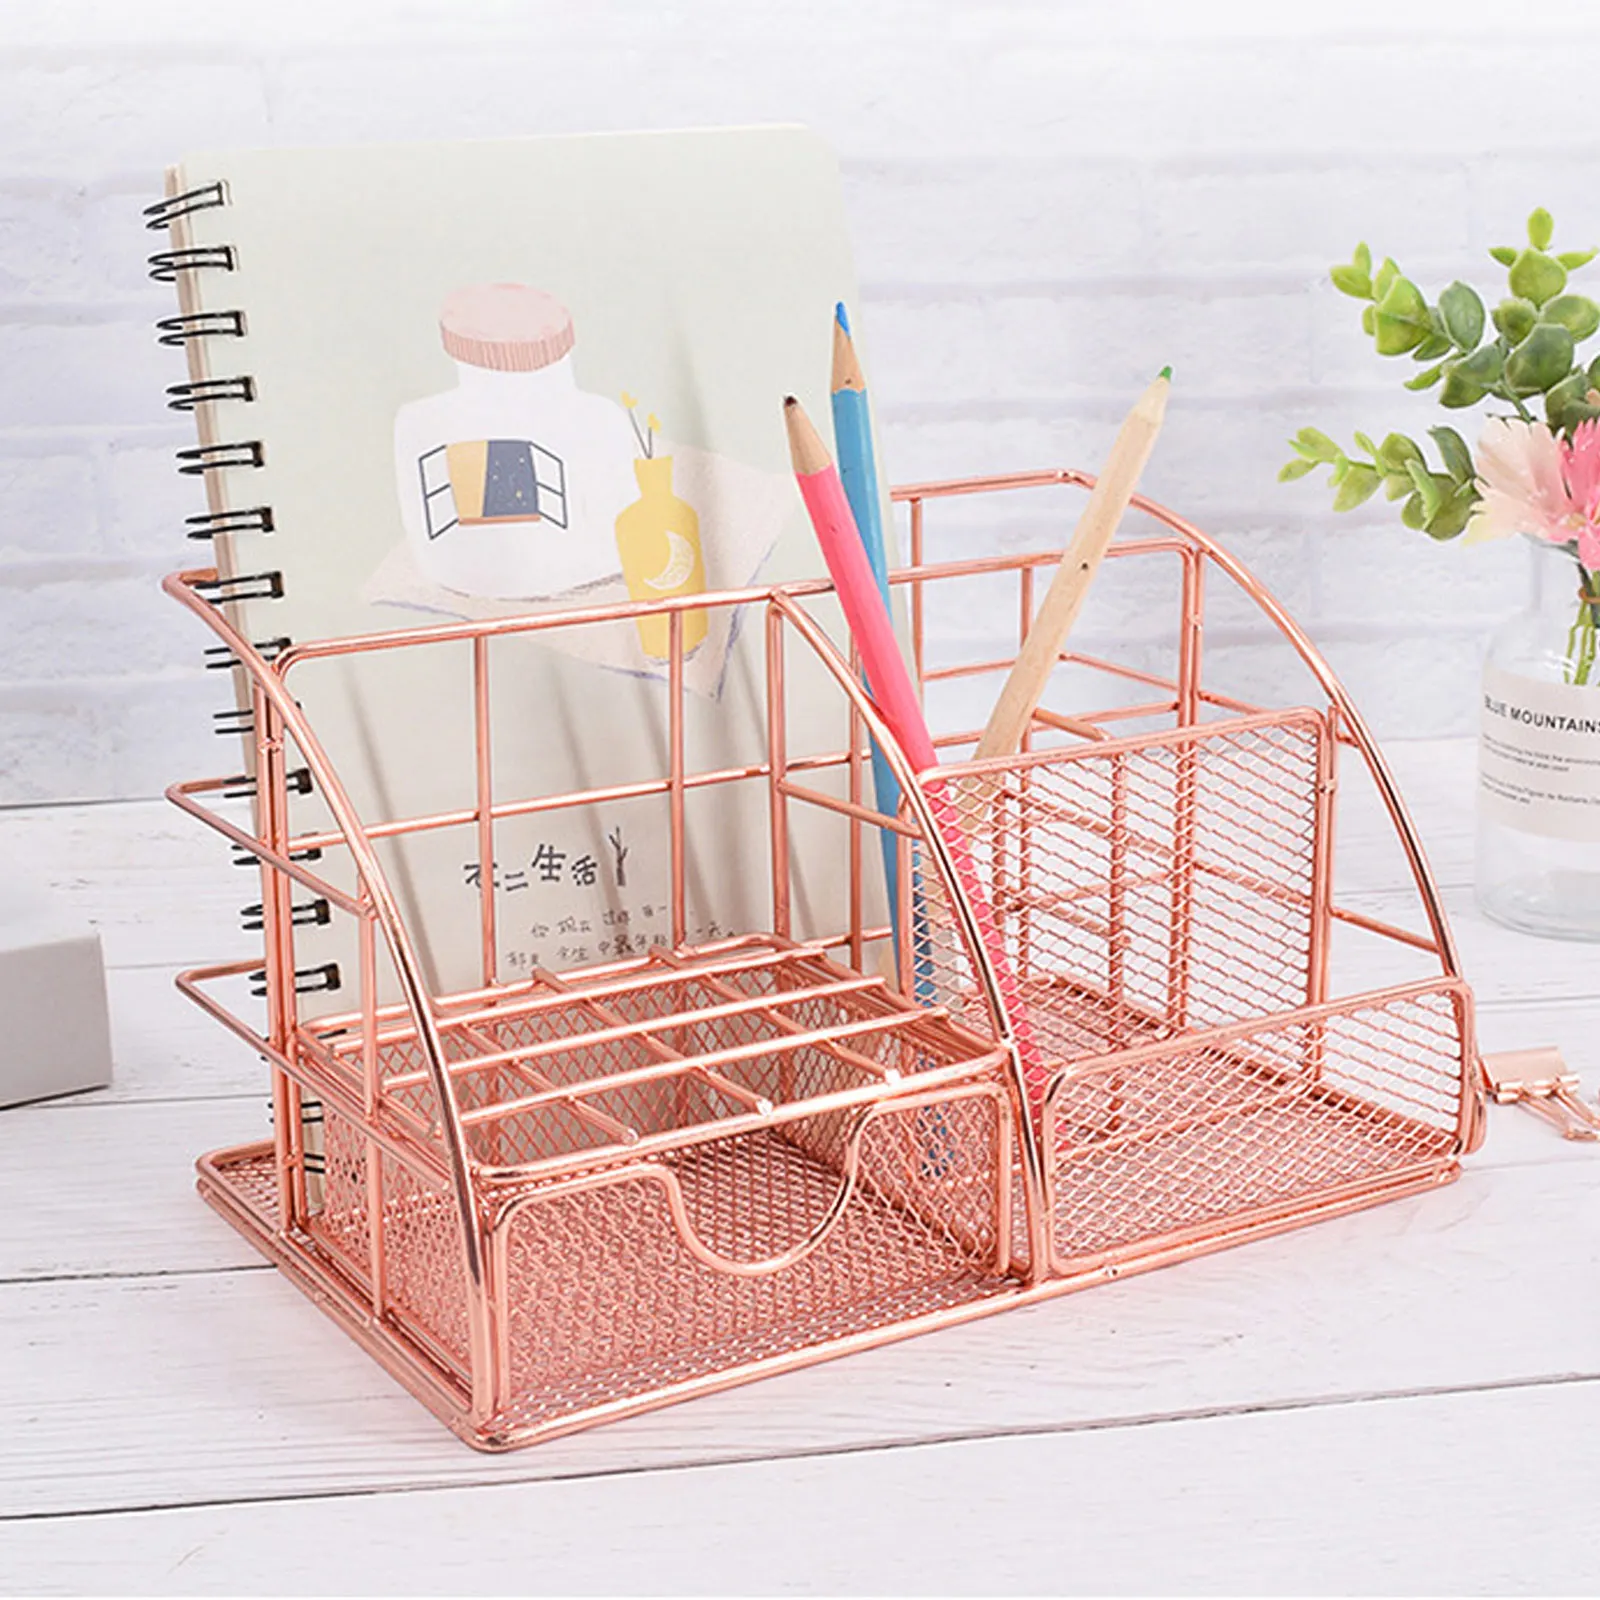 Rose Gold Metal Mesh Office Desk Organizer Pen Magazine Holder Tray File with Drawer for Desktop Accessories Supplies Storage desk organizer metal mesh desktop office supplies multi functional caddy pen holder stationery with 8 compartments and 1 drawer